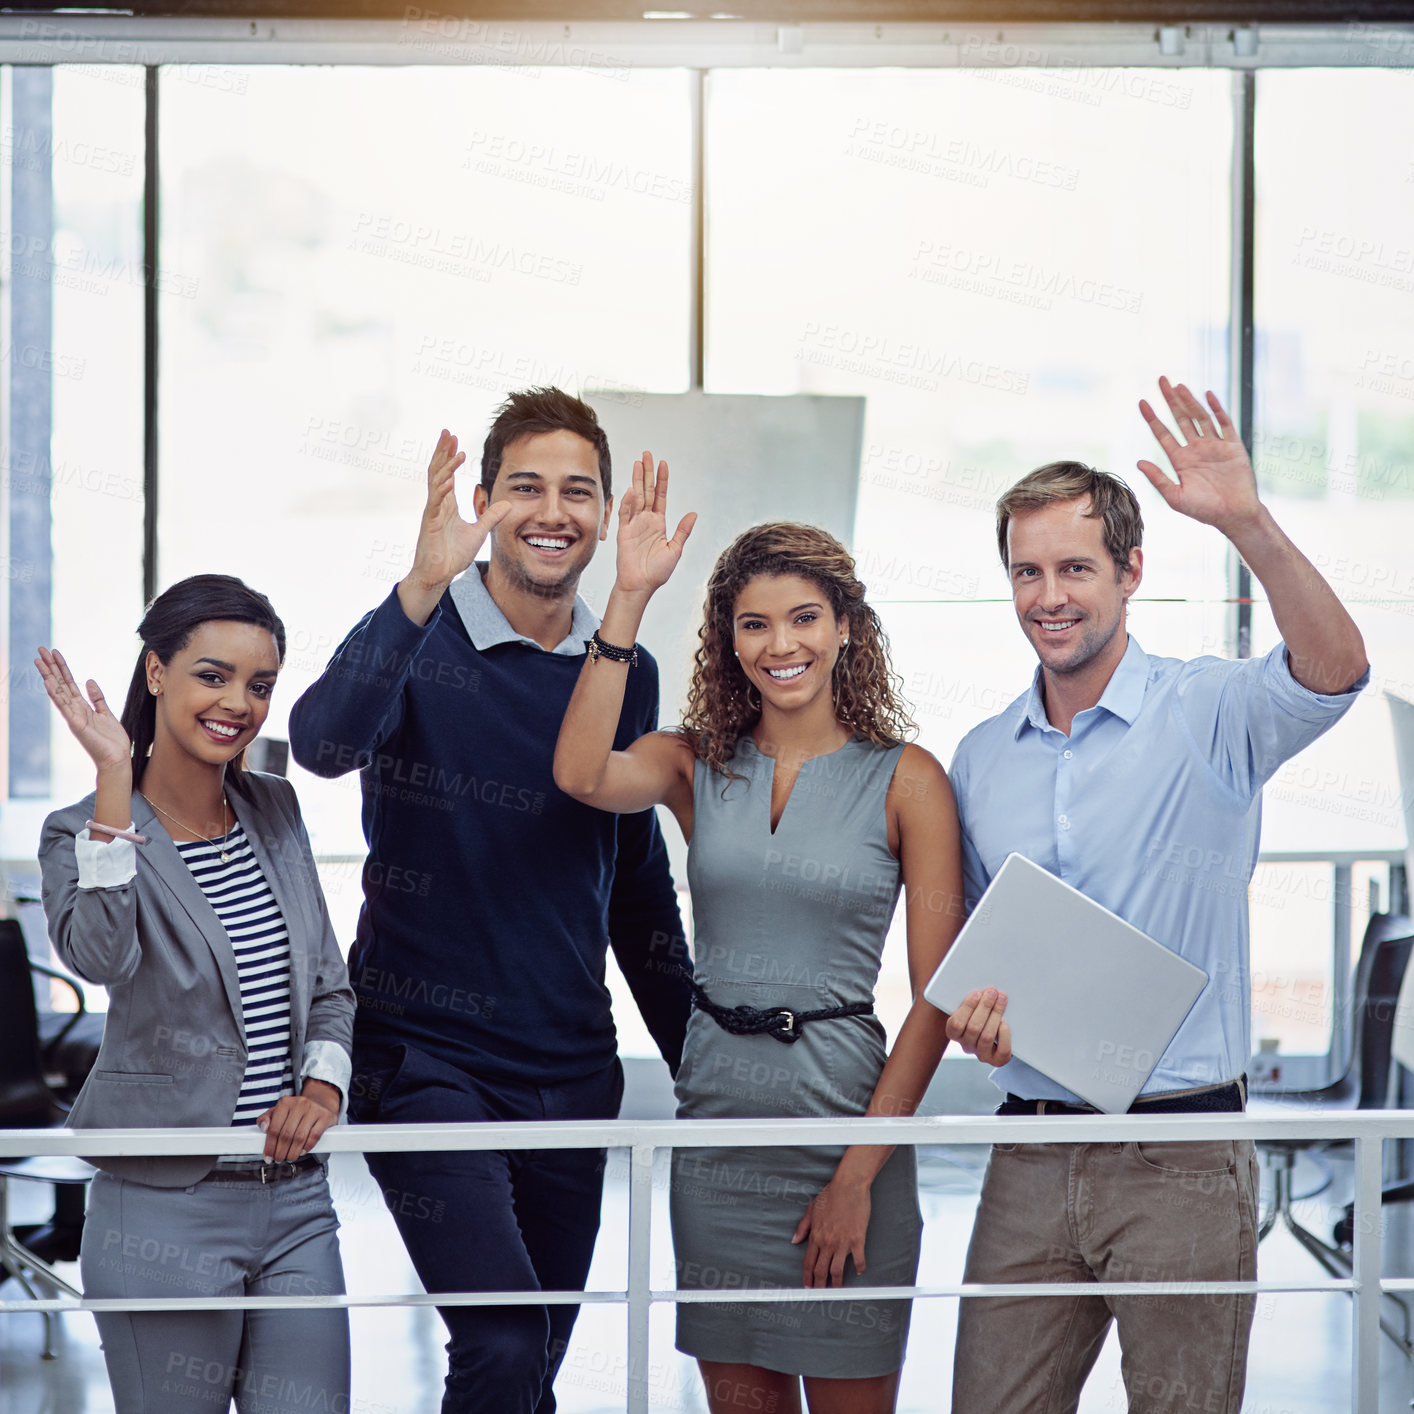 Buy stock photo Portrait of a group of colleagues waving together in an office